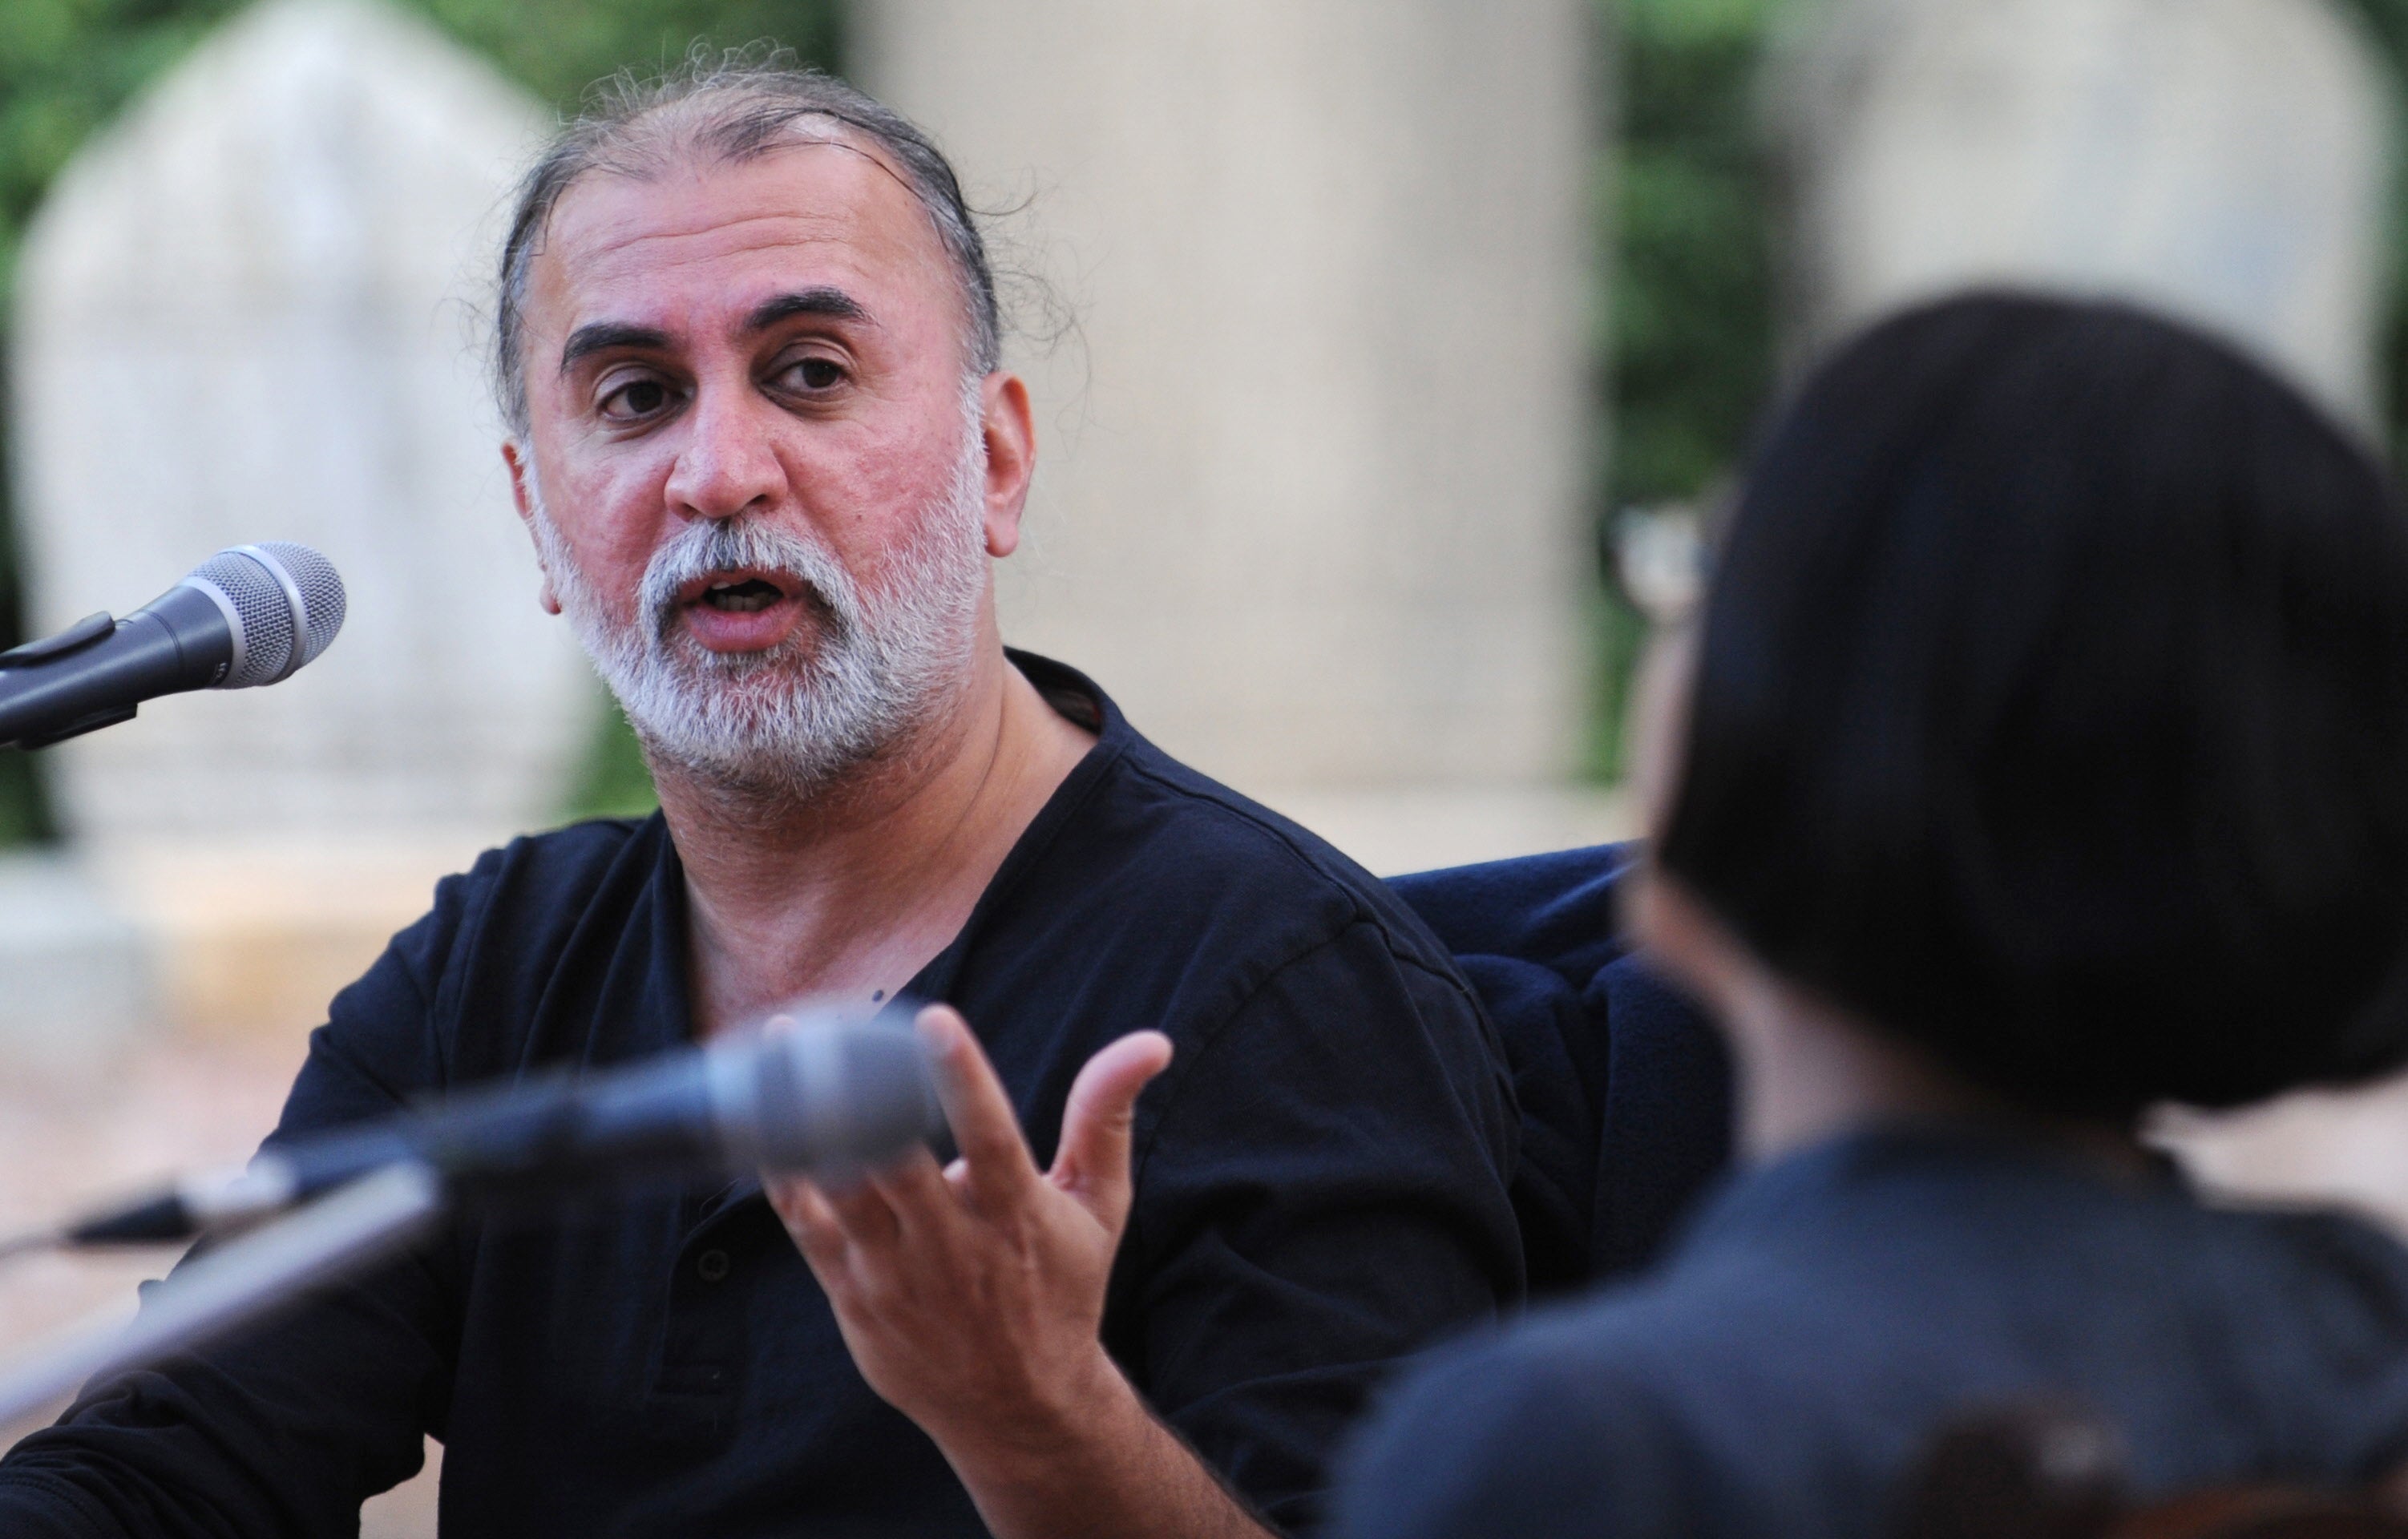 Indian media maven Tarun Tejpal was acquitted by Indian court, in a sexual assault case of 2013